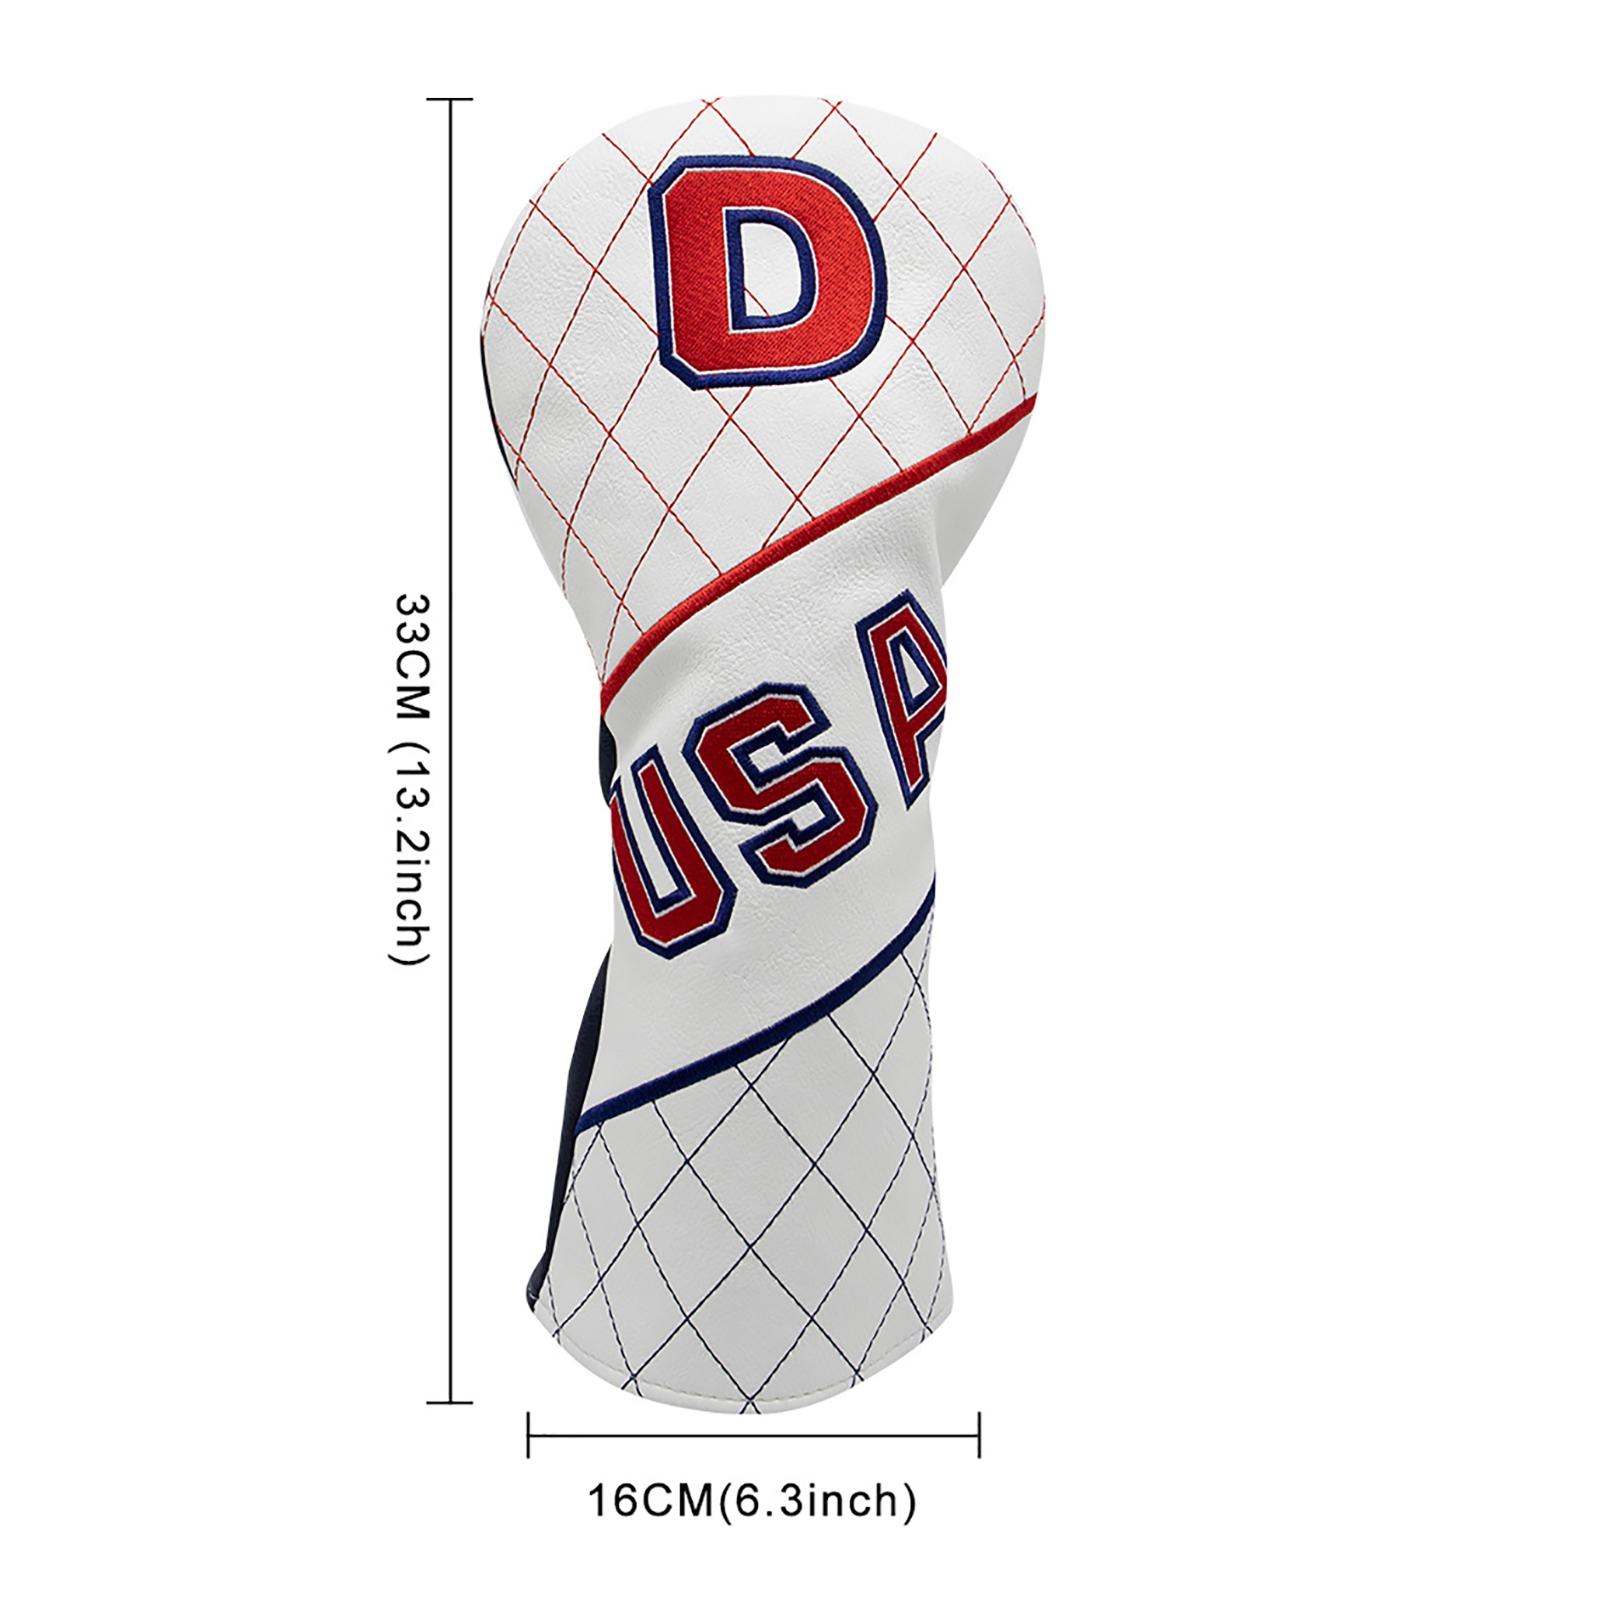 Club Head Covers USA Fashion Premium Lightweight for Sports Travel Men Women For Driver